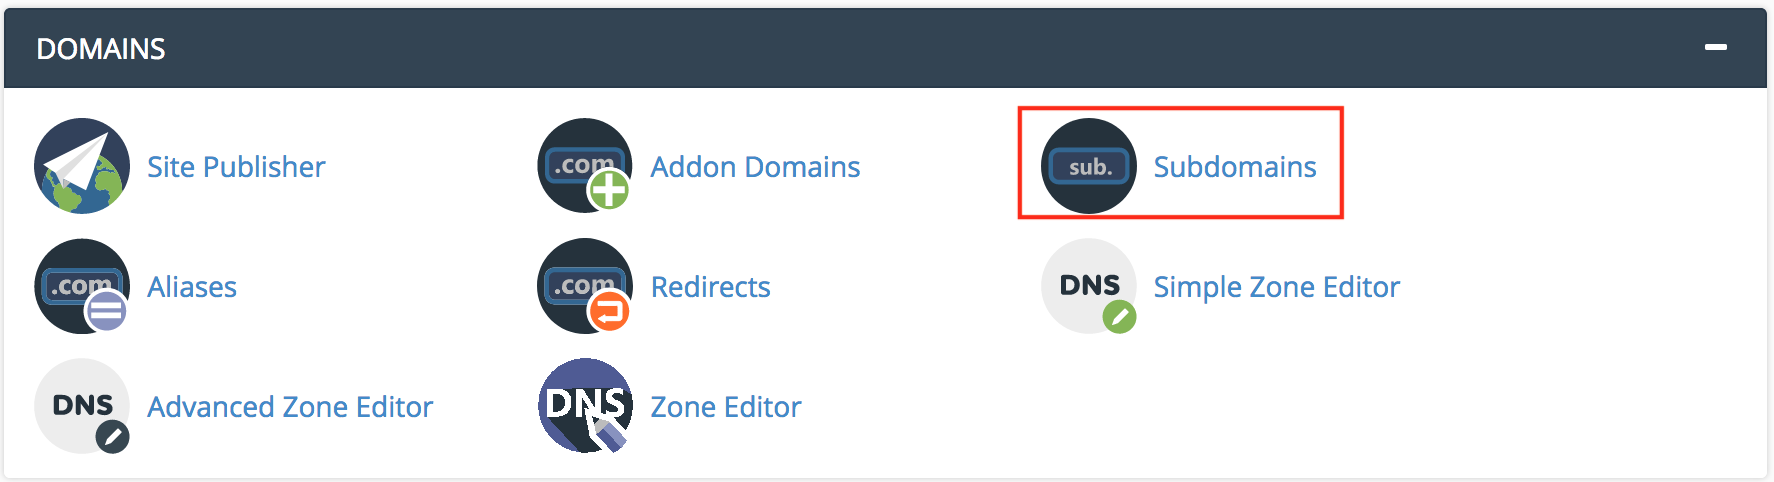 Image showing Subdomains section of cPanel